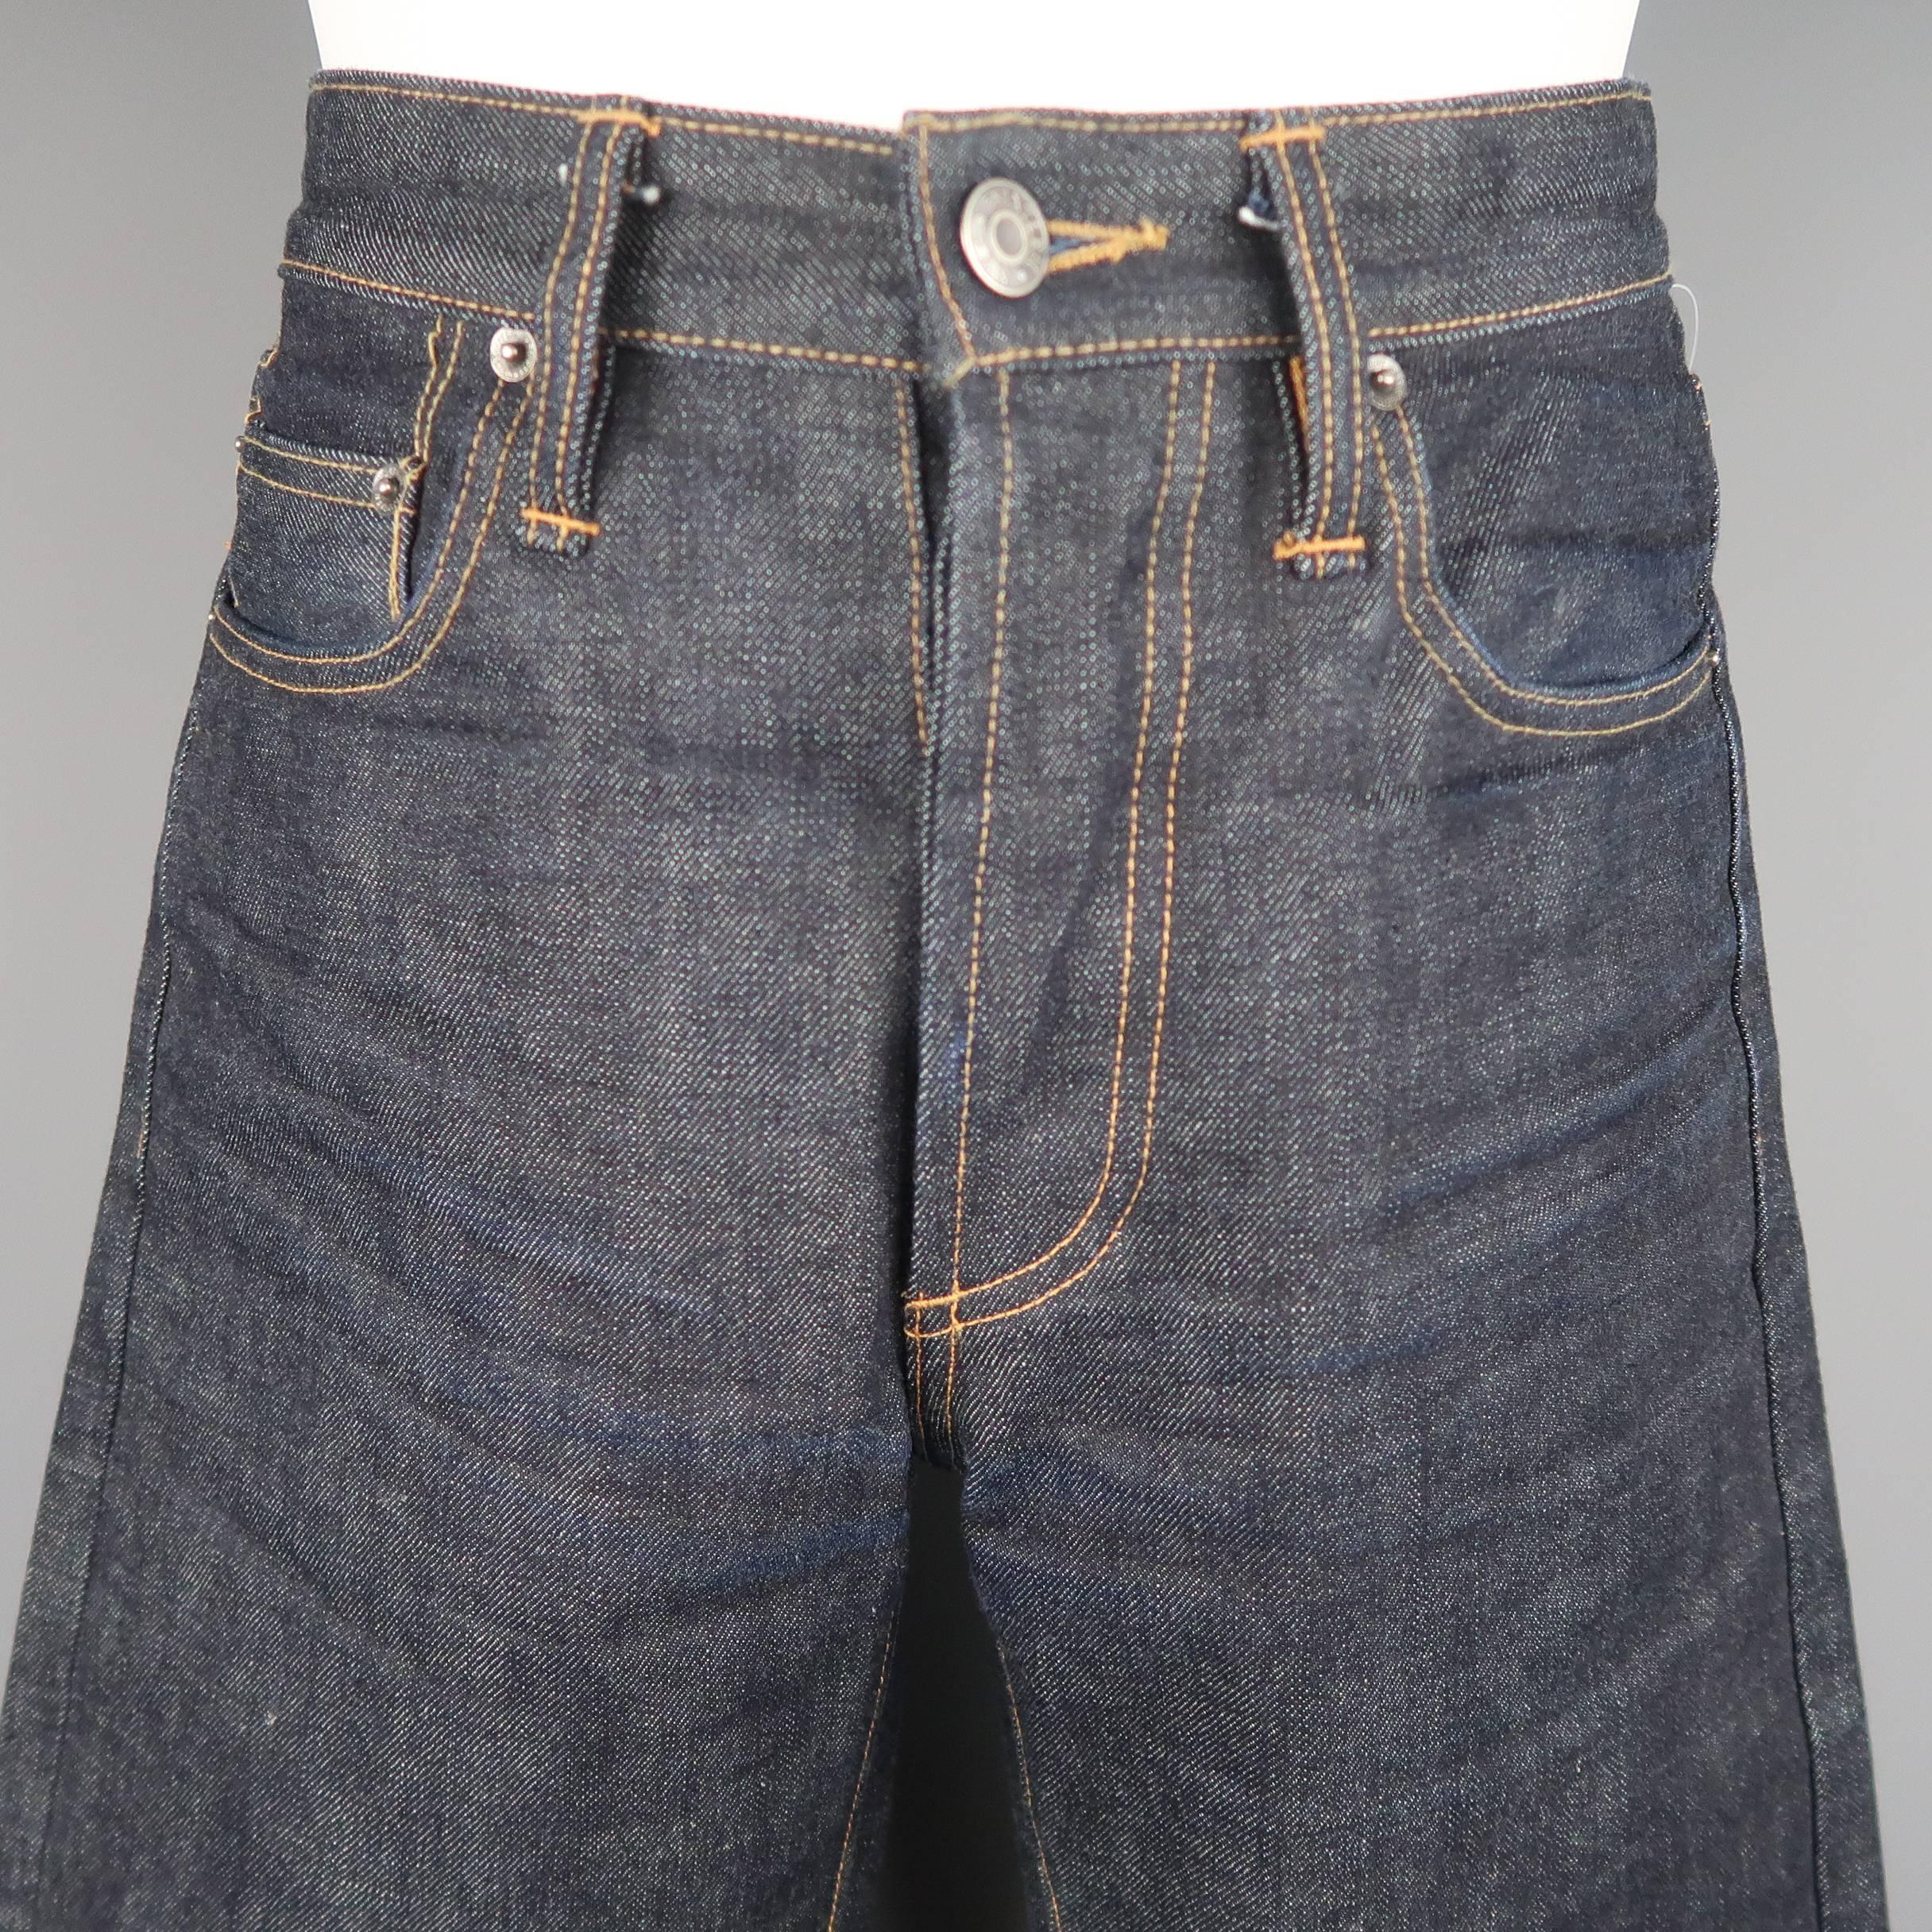 3SIXTEEN jeans come in classic indigo raw selvedge denim with contrast stitching and a classic fit. Made in USA.
 
Good Pre-Owned Condition.
Marked: W: 30 L: 35
 
Measurements:
 
Waist: 30 in.
Rise: 10.5 in.
Inseam: 32 in.
